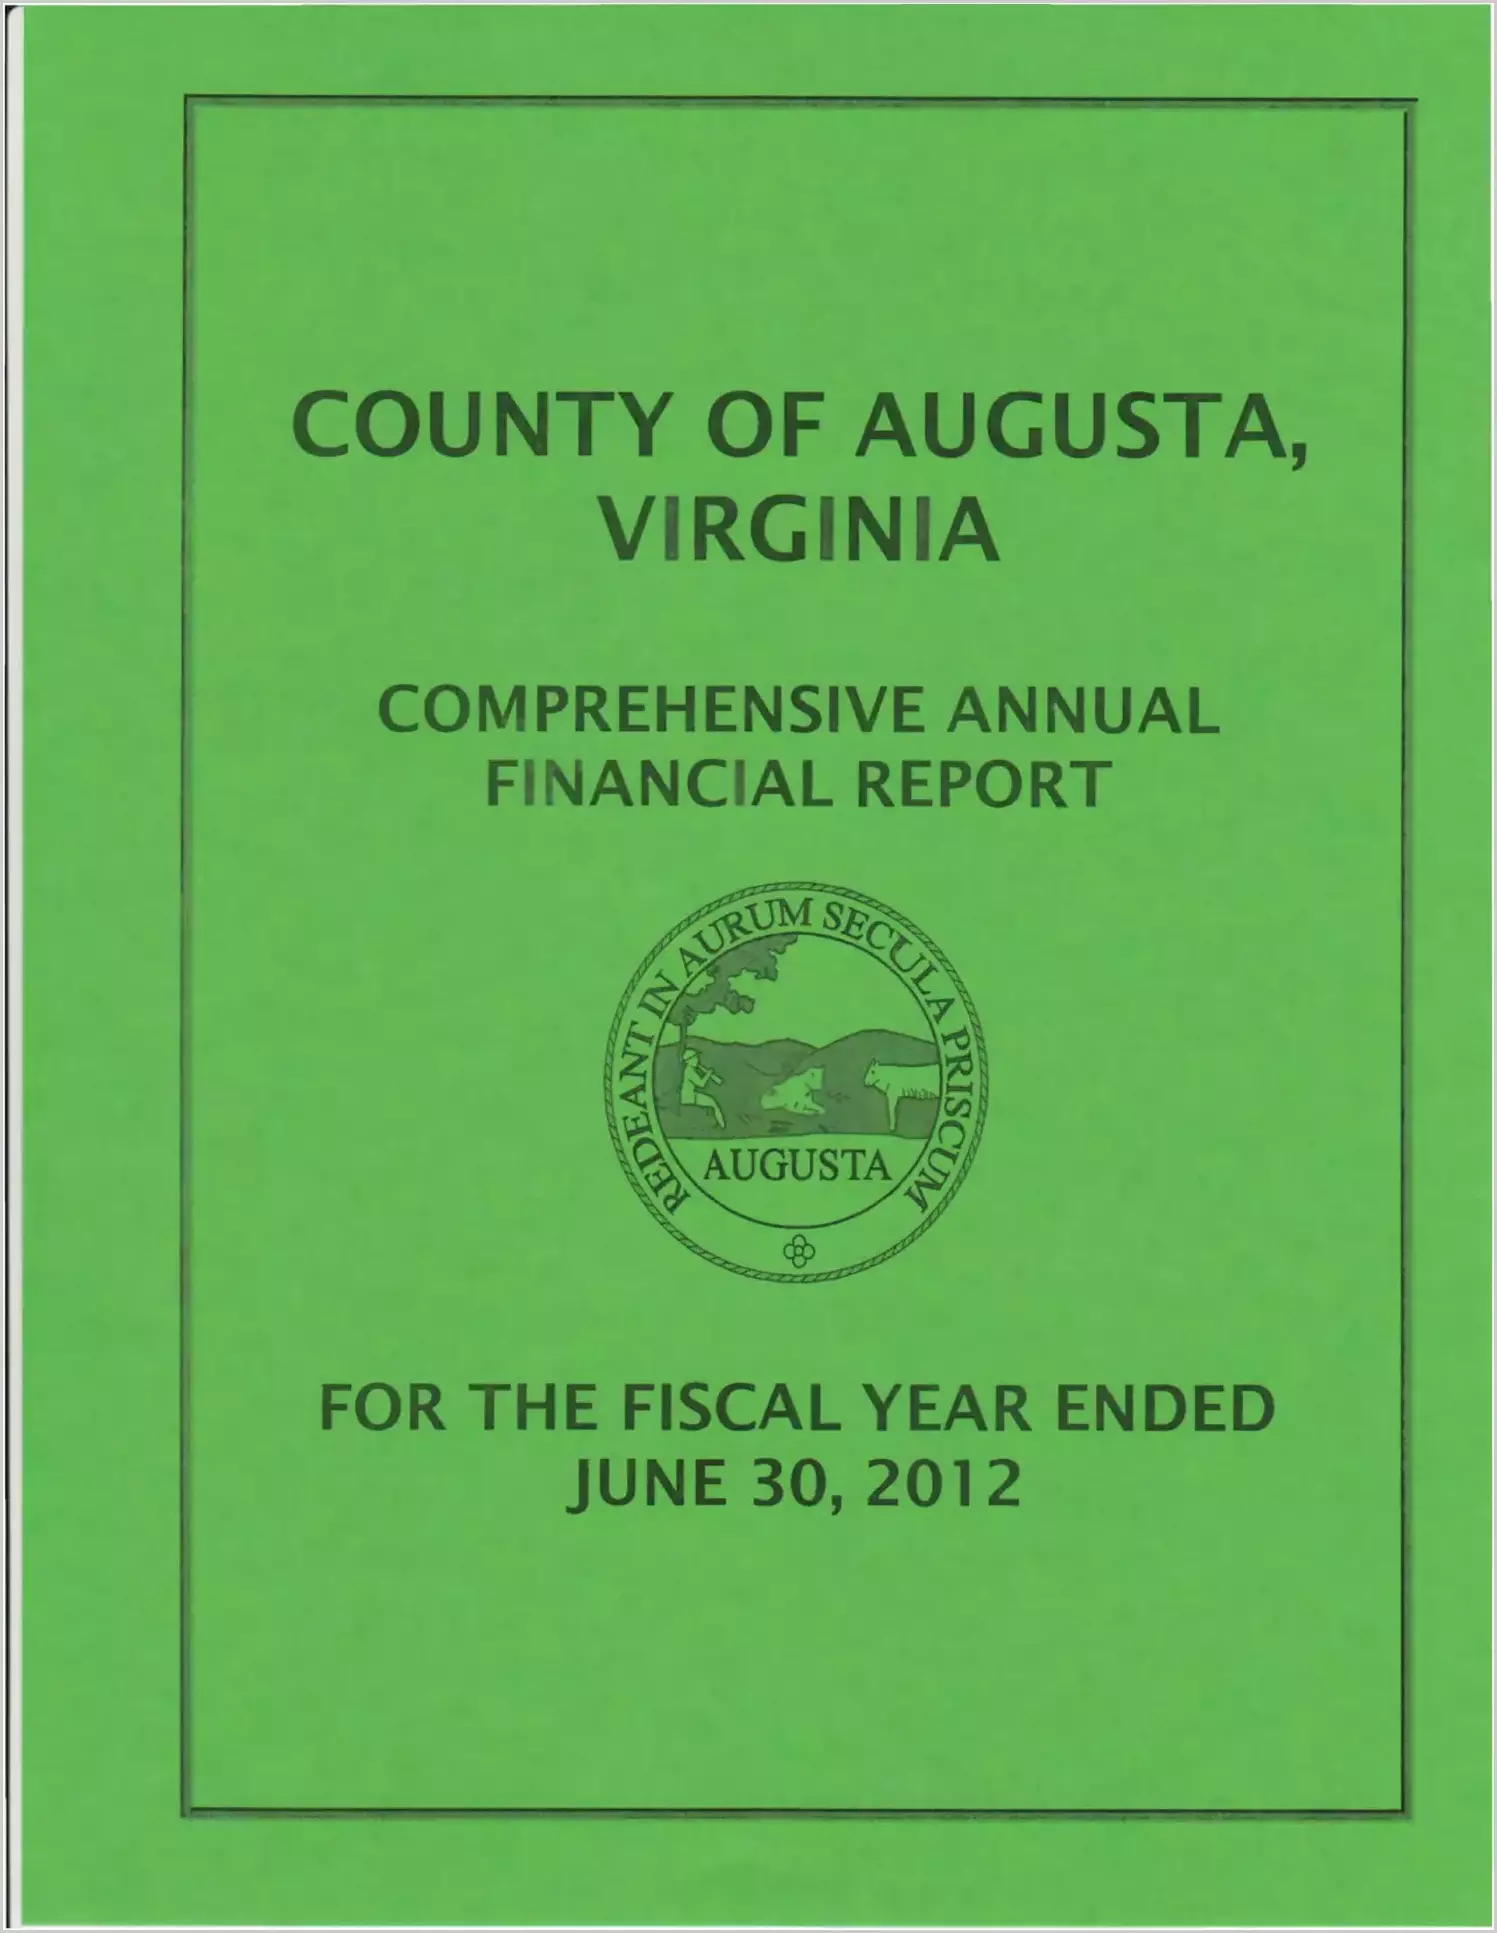 2012 Annual Financial Report for County of Augusta